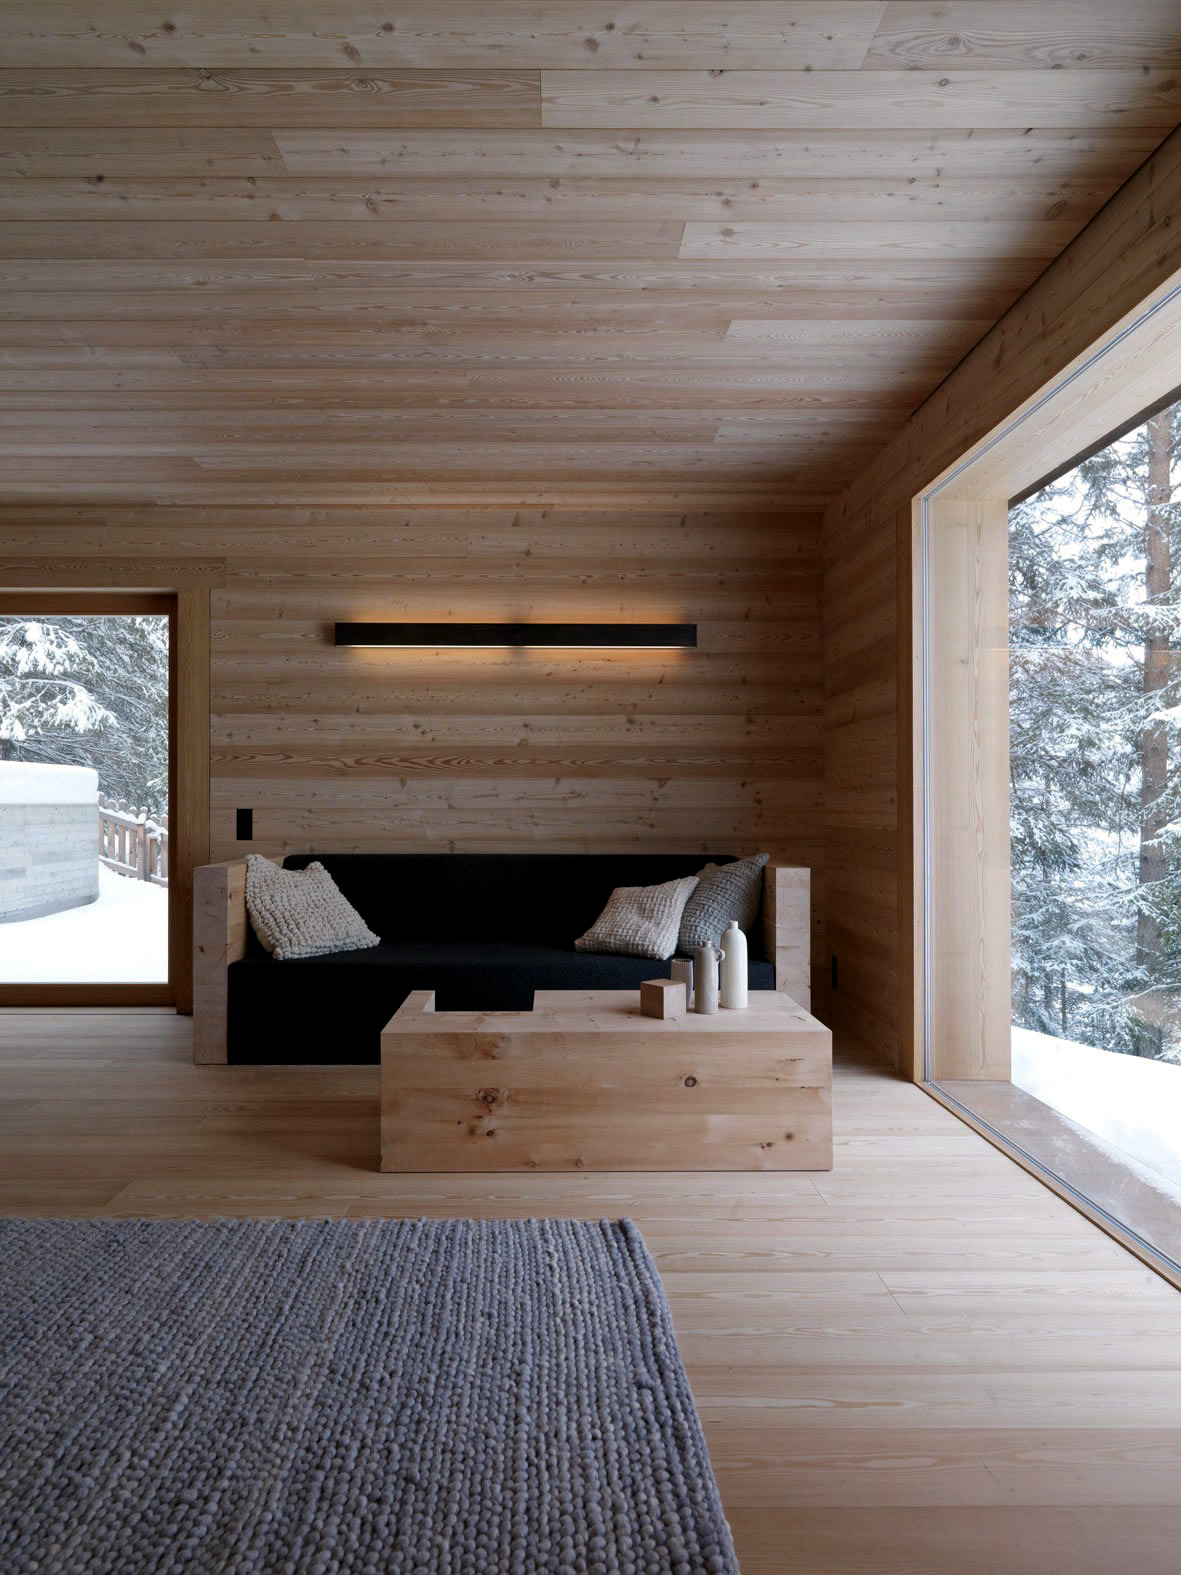 Interior design of a paneled entirely with wood cabin | Interior Design